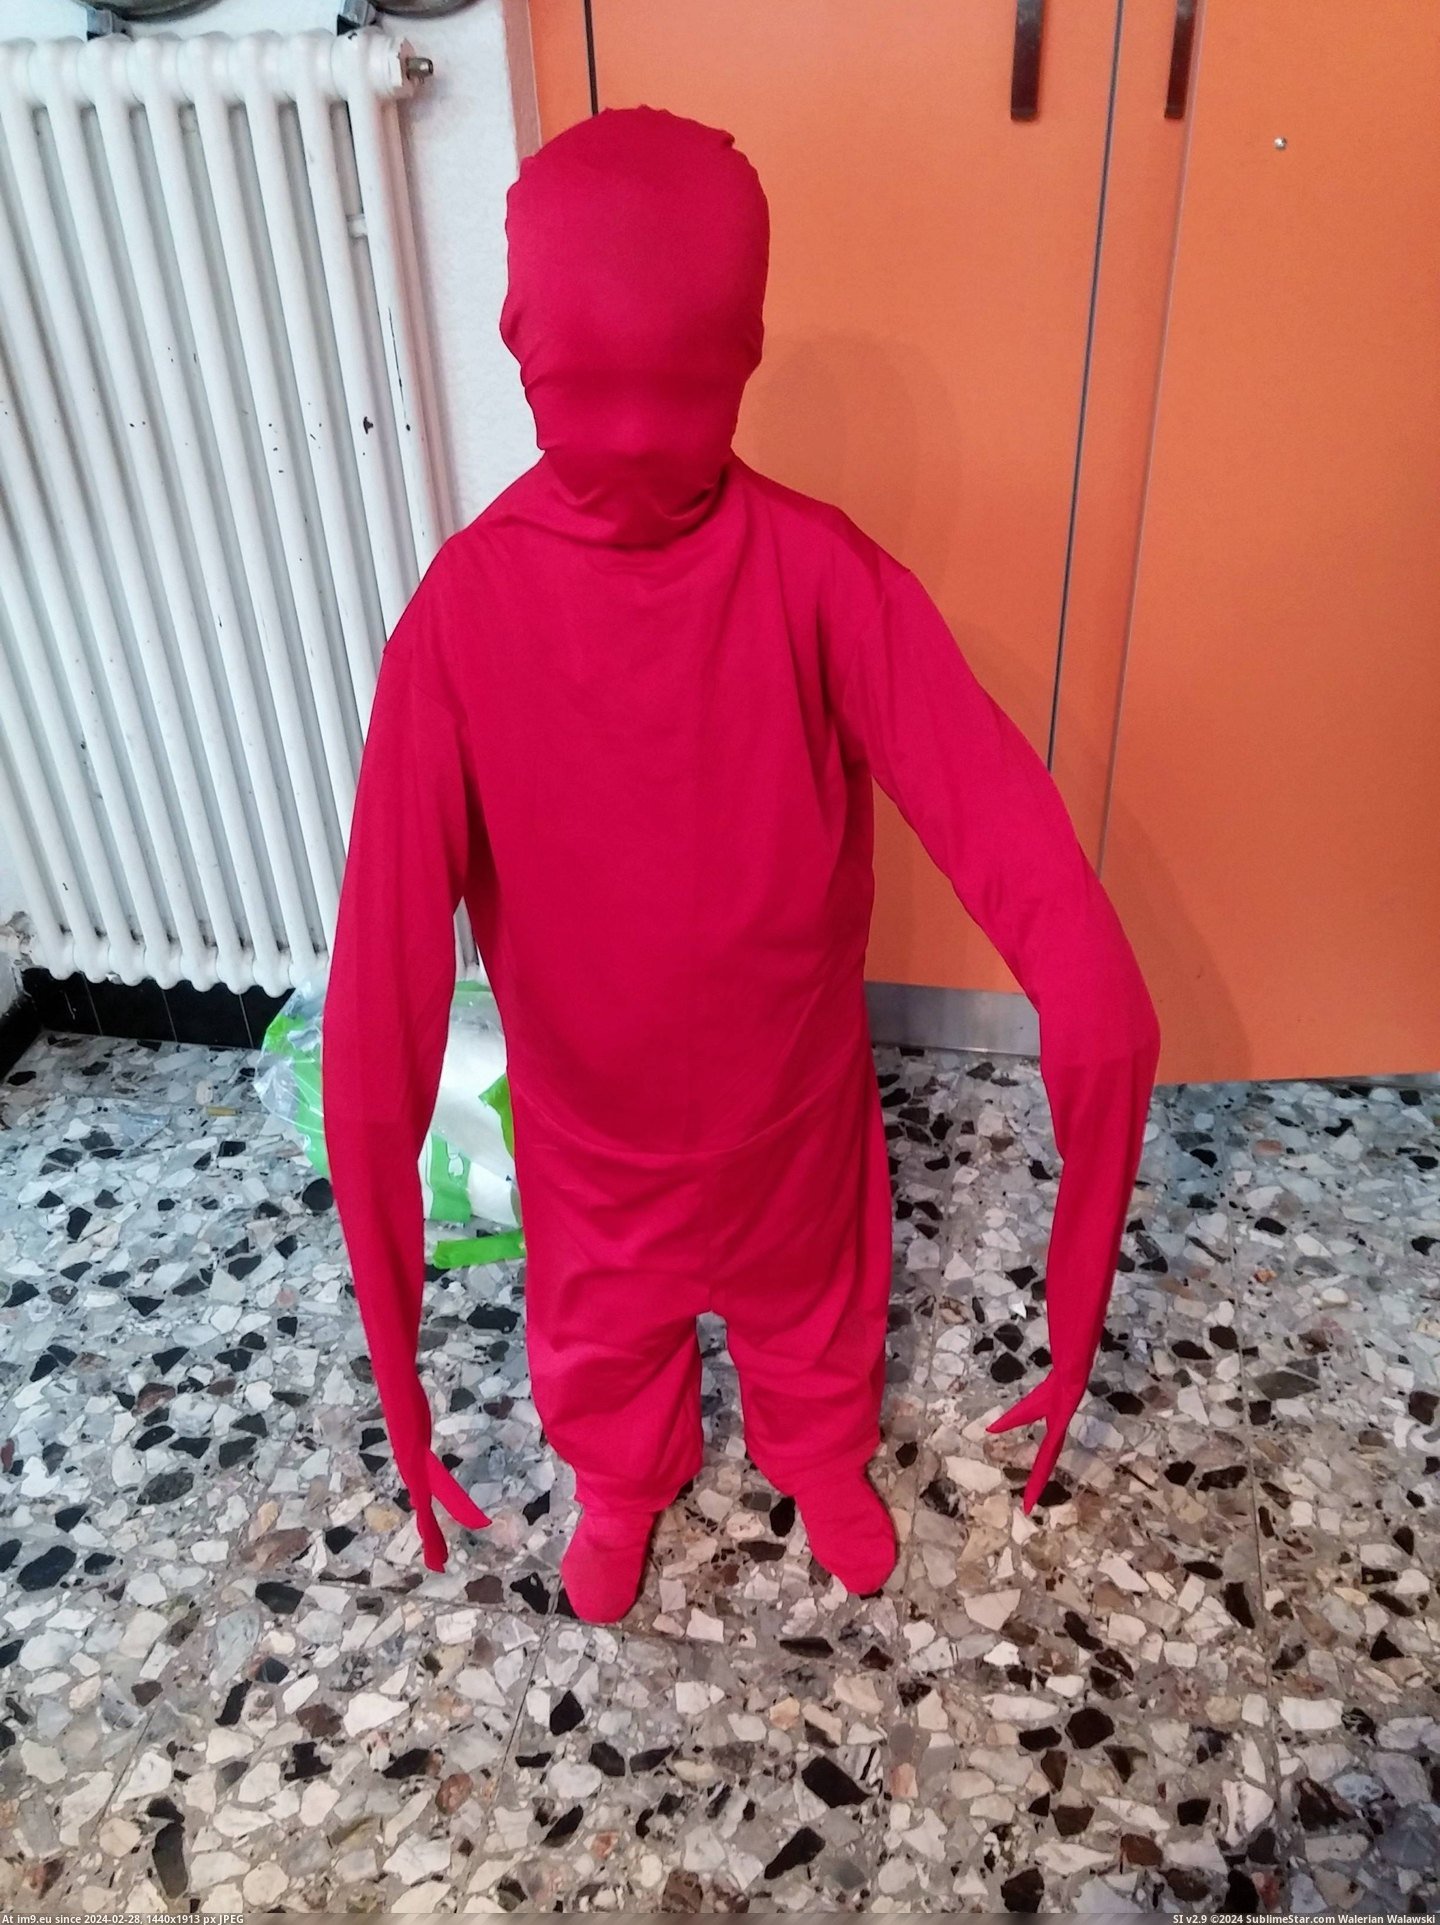 #Son #Terrifying #Morph #Suit [Pics] my son found my morph suit and it's terrifying Pic. (Bild von album My r/PICS favs))